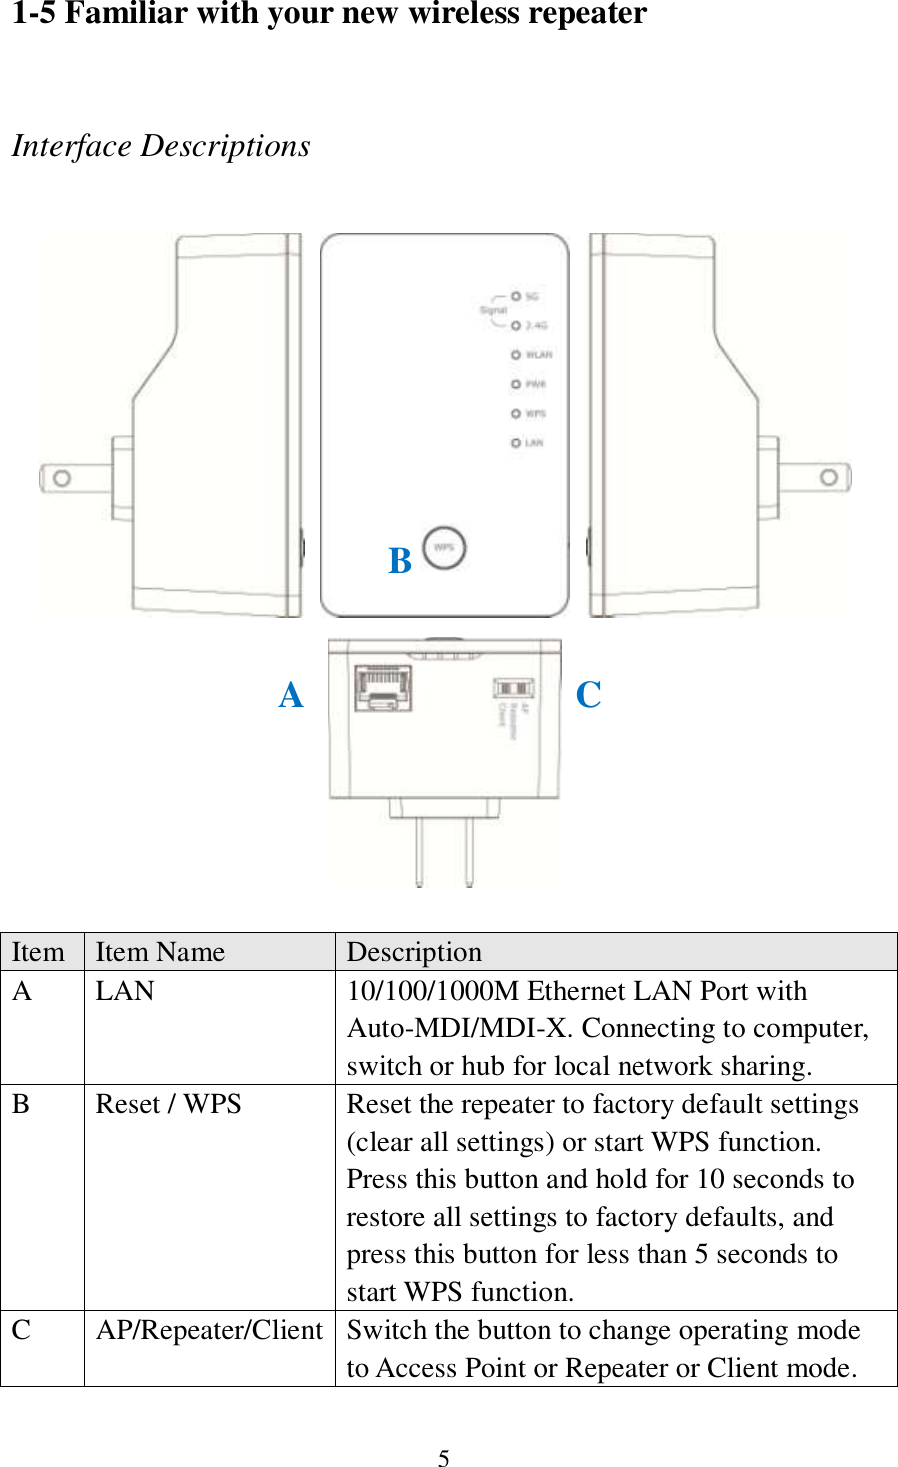 5 1-5 Familiar with your new wireless repeater  Interface Descriptions         Item Item Name Description A LAN 10/100/1000M Ethernet LAN Port with Auto-MDI/MDI-X. Connecting to computer, switch or hub for local network sharing. B Reset / WPS Reset the repeater to factory default settings (clear all settings) or start WPS function. Press this button and hold for 10 seconds to restore all settings to factory defaults, and press this button for less than 5 seconds to start WPS function. C AP/Repeater/Client Switch the button to change operating mode to Access Point or Repeater or Client mode. A B C 